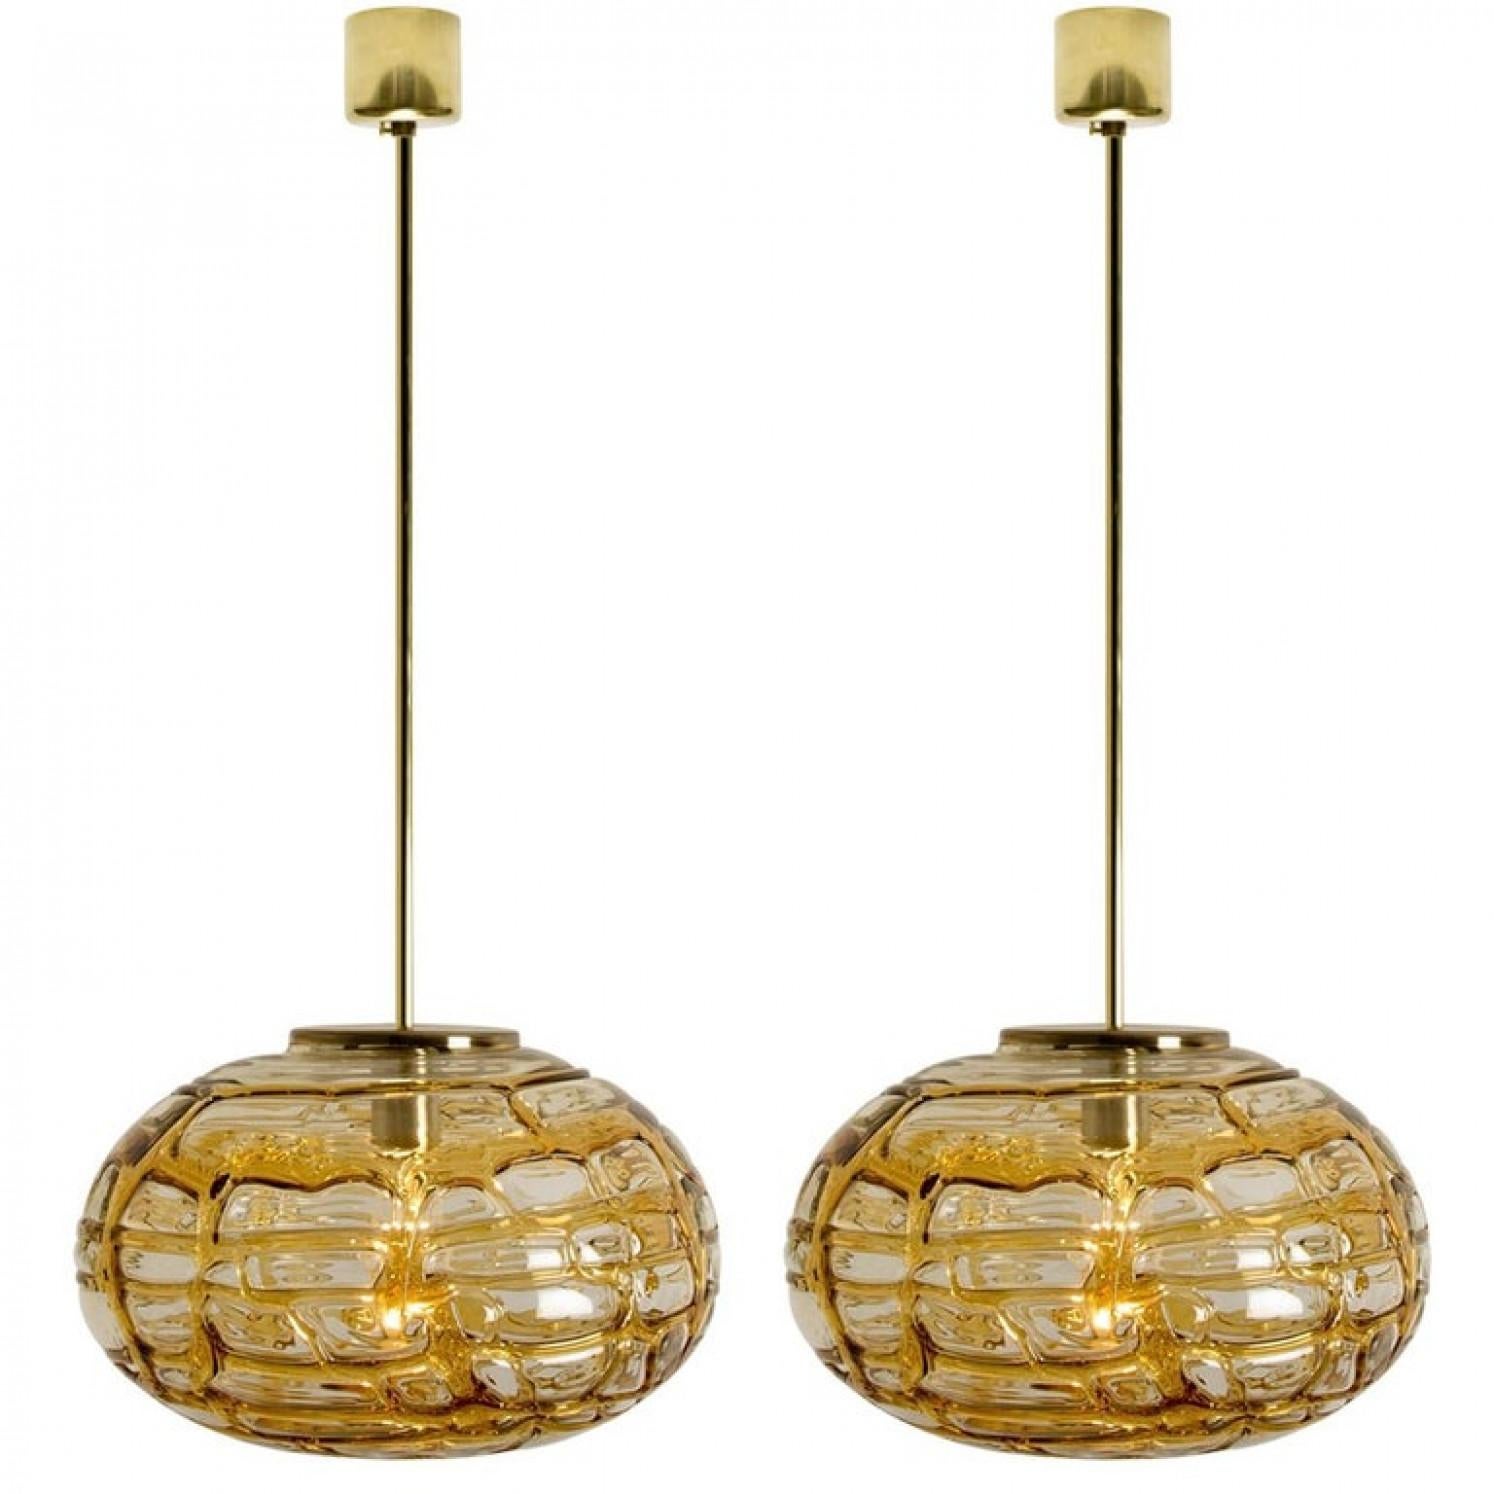 Pair of Amber Murano Glass Pendant Lamp, 1960s For Sale 8